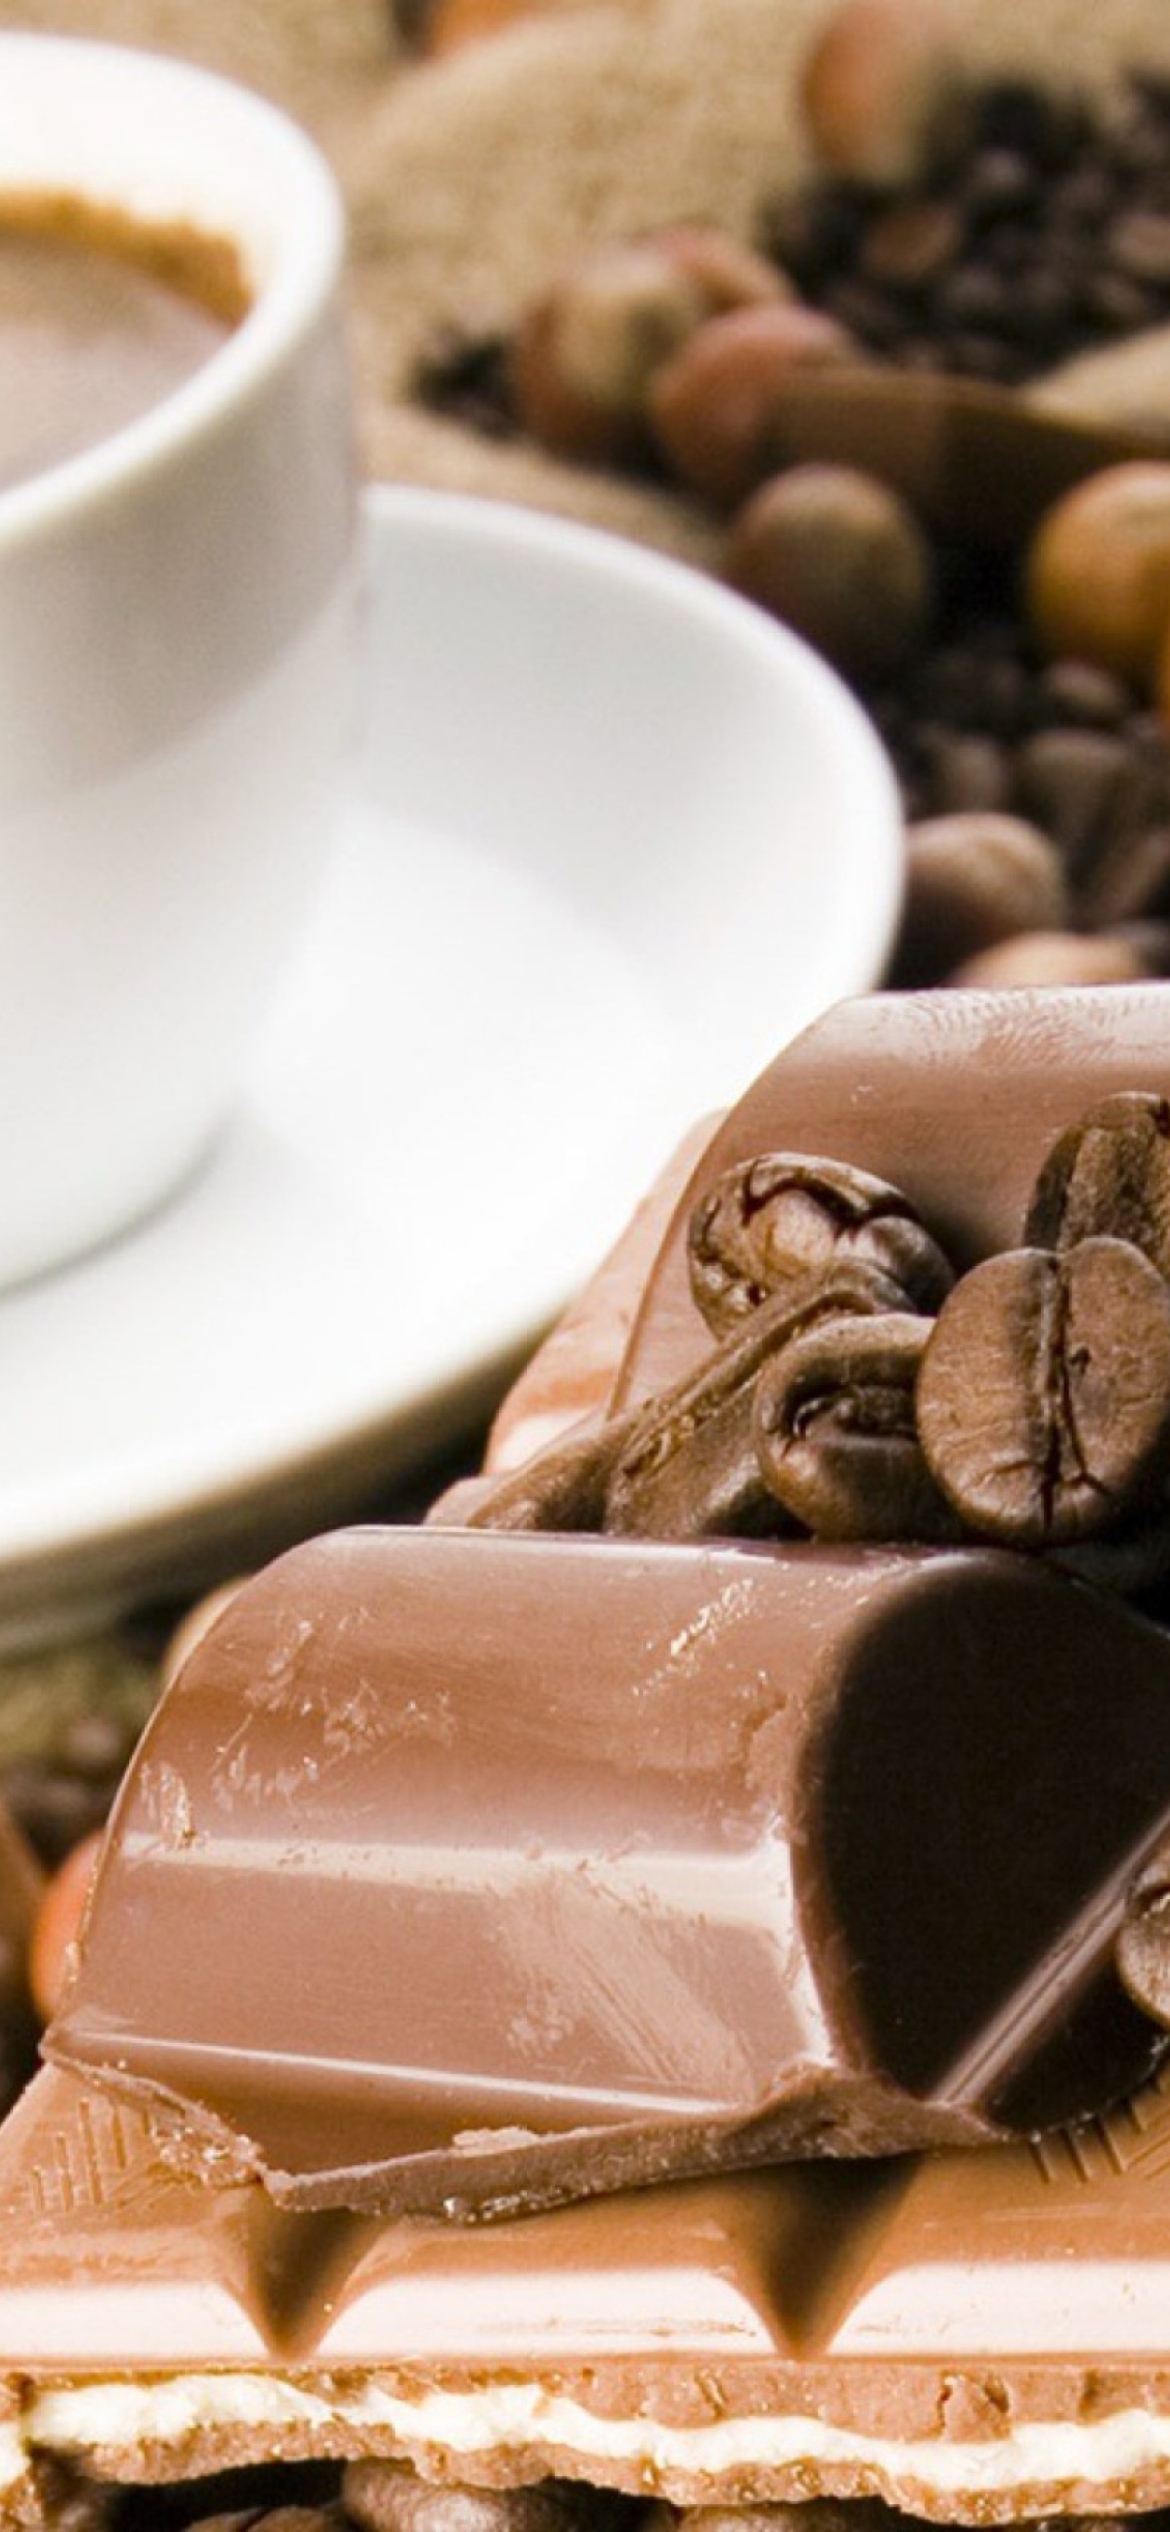 Das Coffee And Chocolate Wallpaper 1170x2532